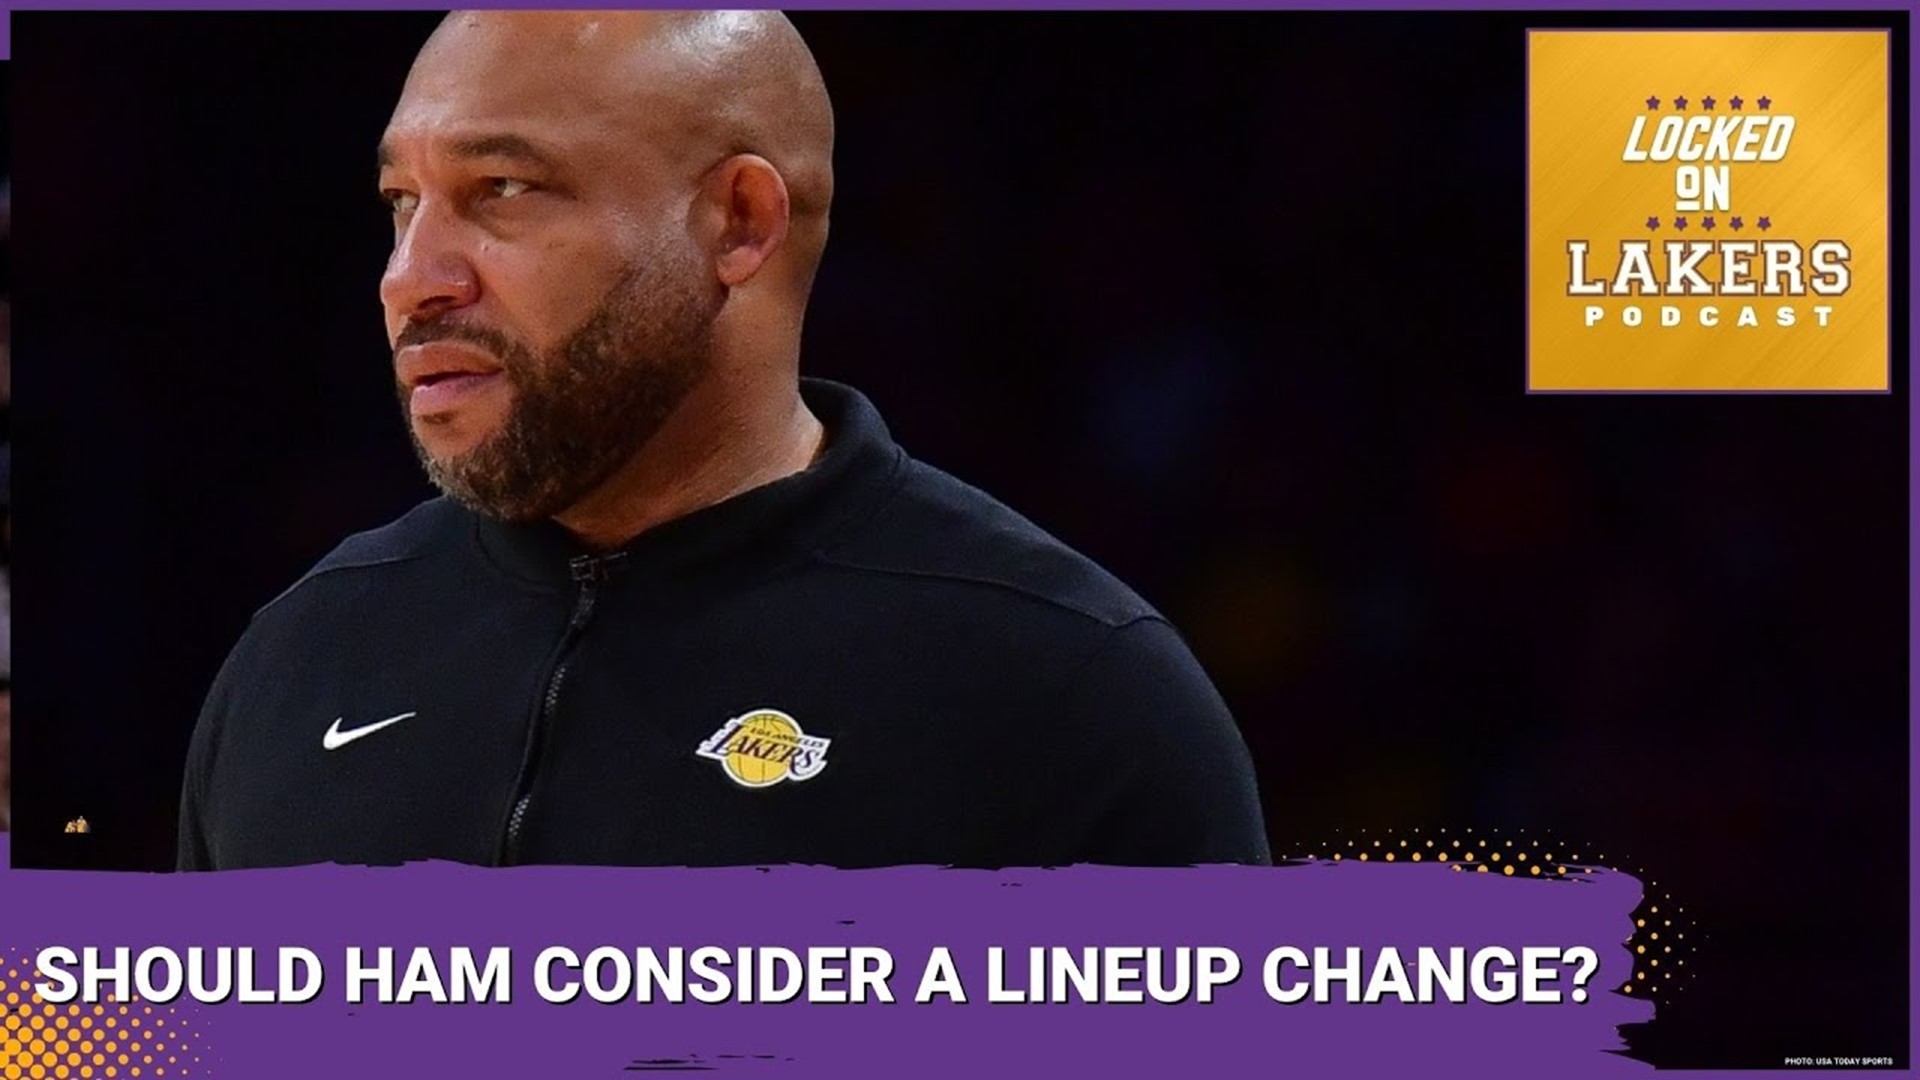 The Lakers still have designs on moving up in the Western Conference, and the narrowest of windows in which to get it done. There are opportunities.